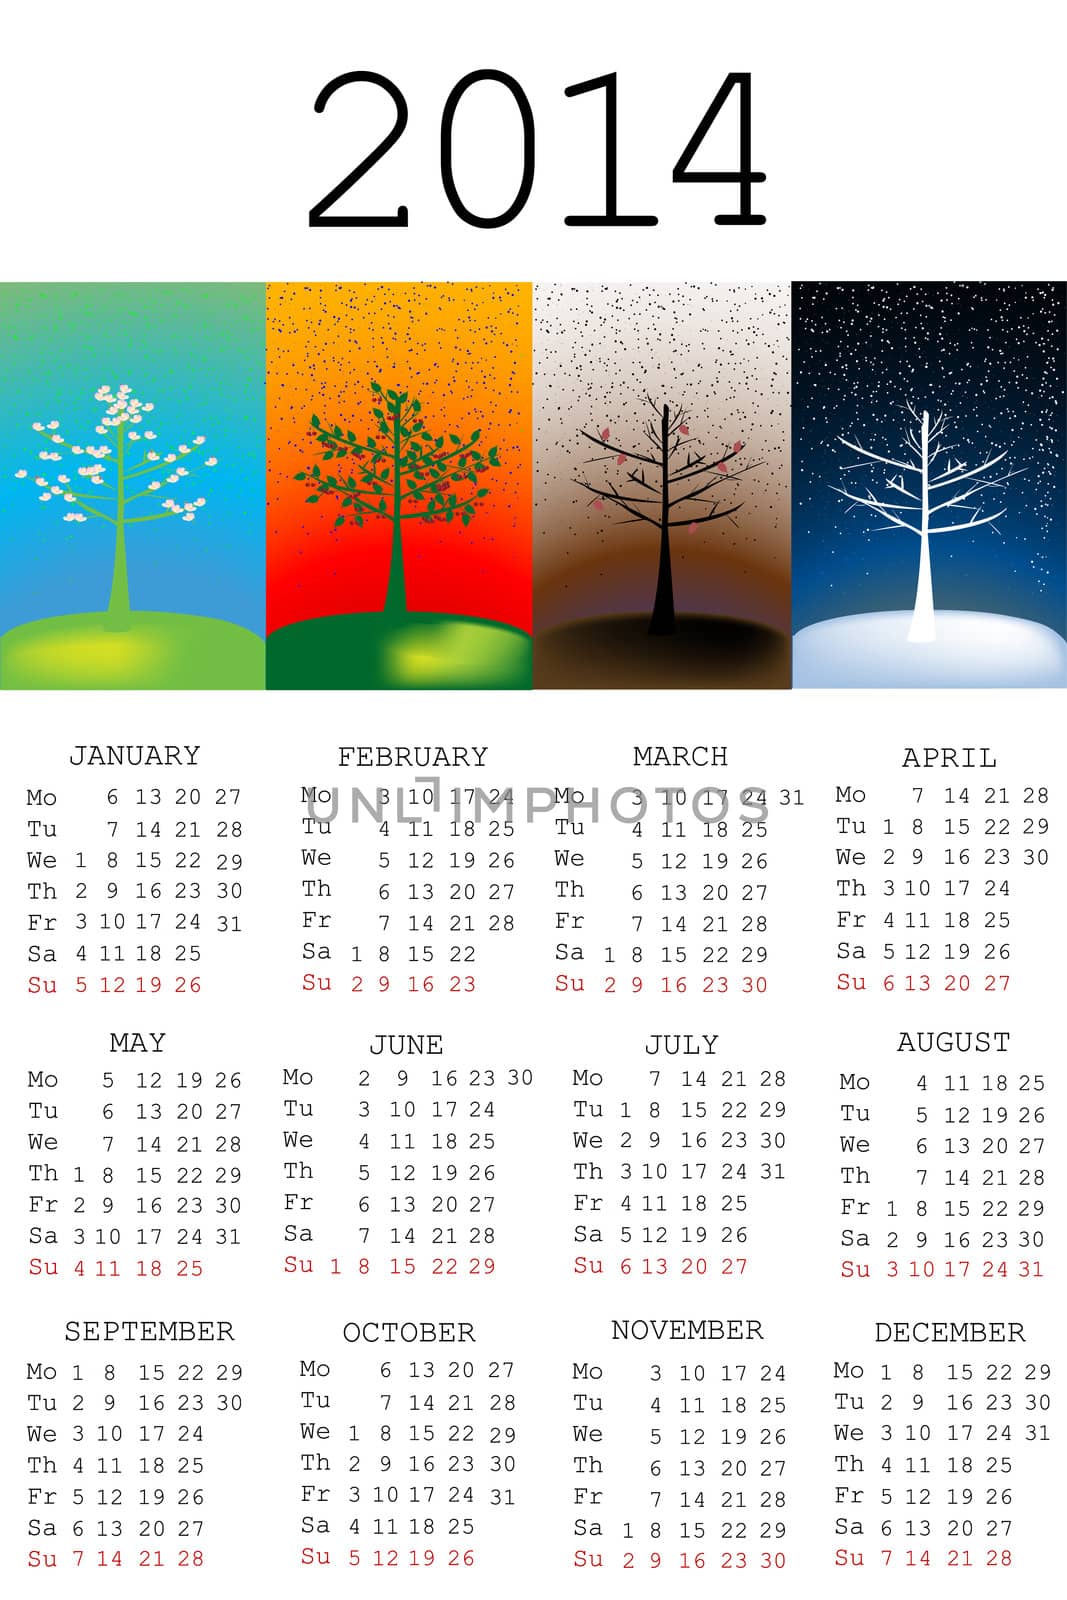 2014 Calendar with tree in all the seasons